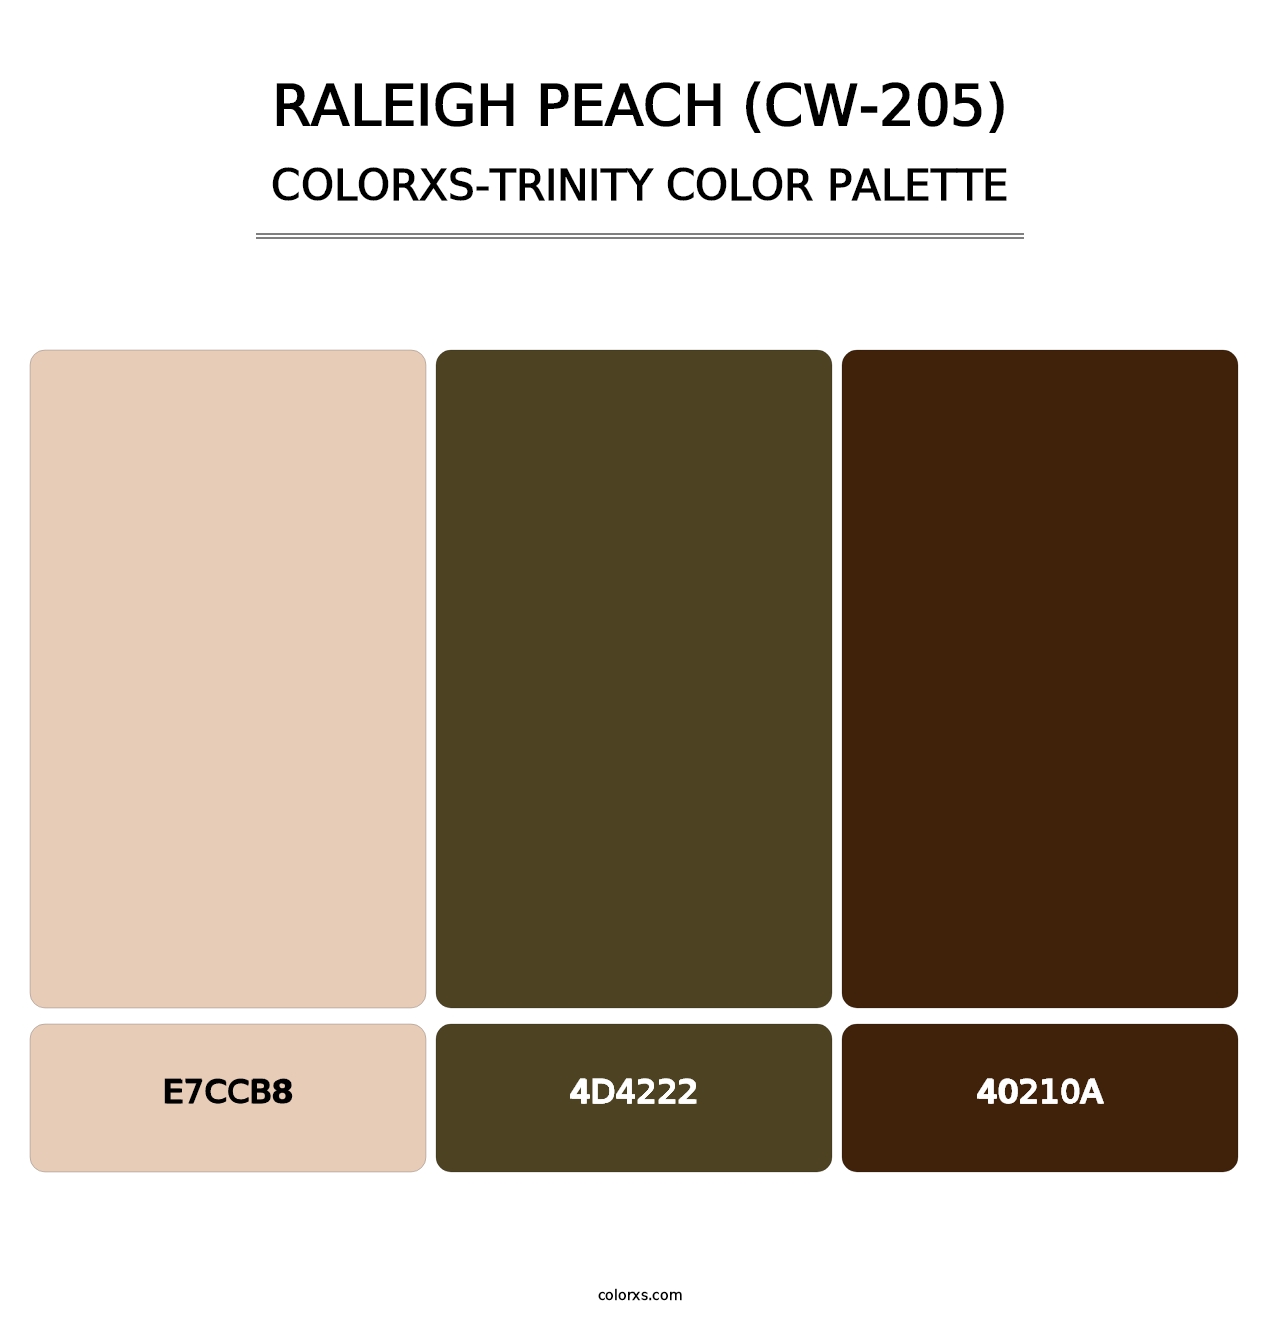 Raleigh Peach (CW-205) - Colorxs Trinity Palette